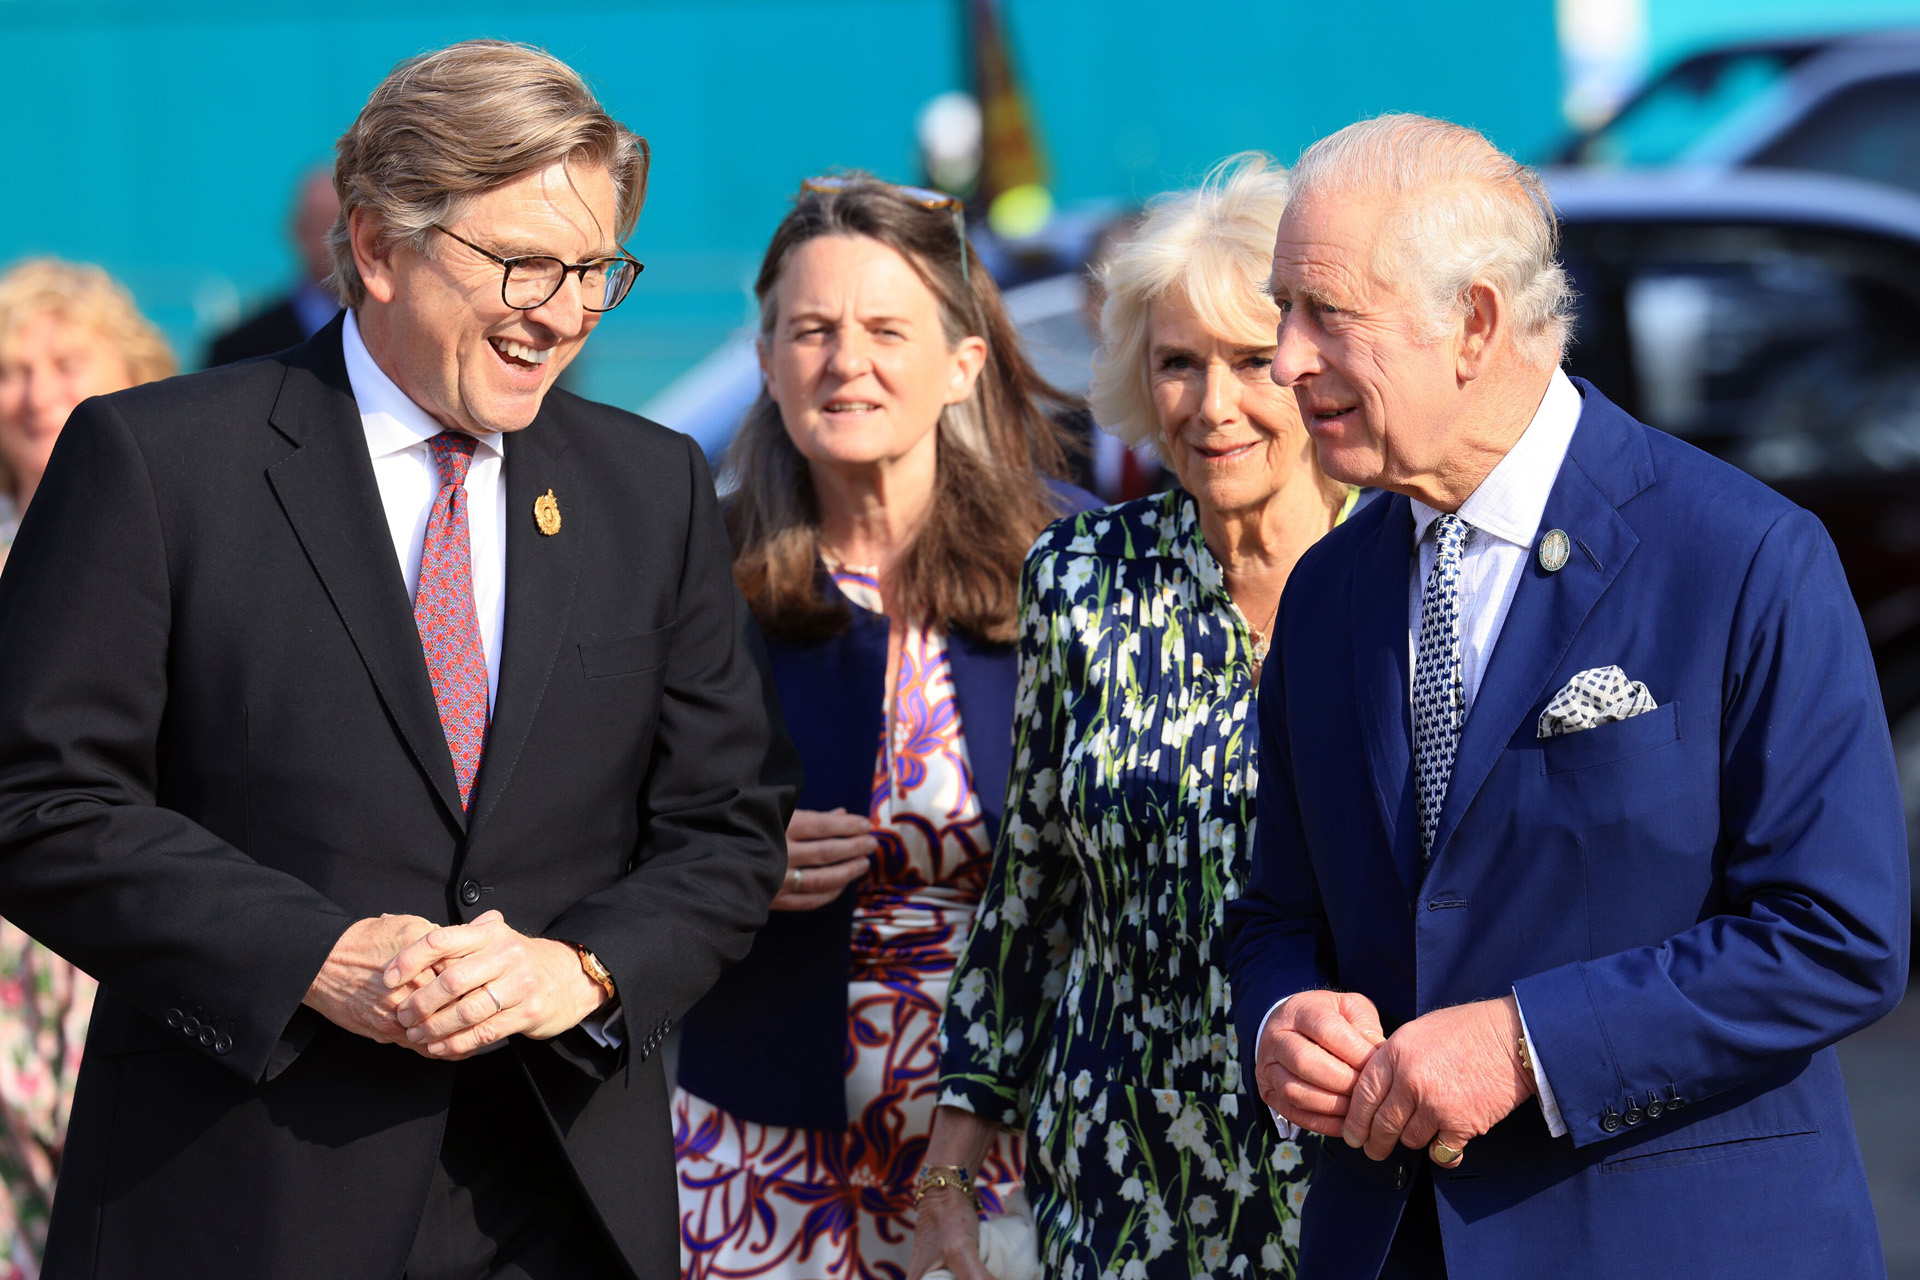 King Charles III at RHS Chelsea Flower Show 2023